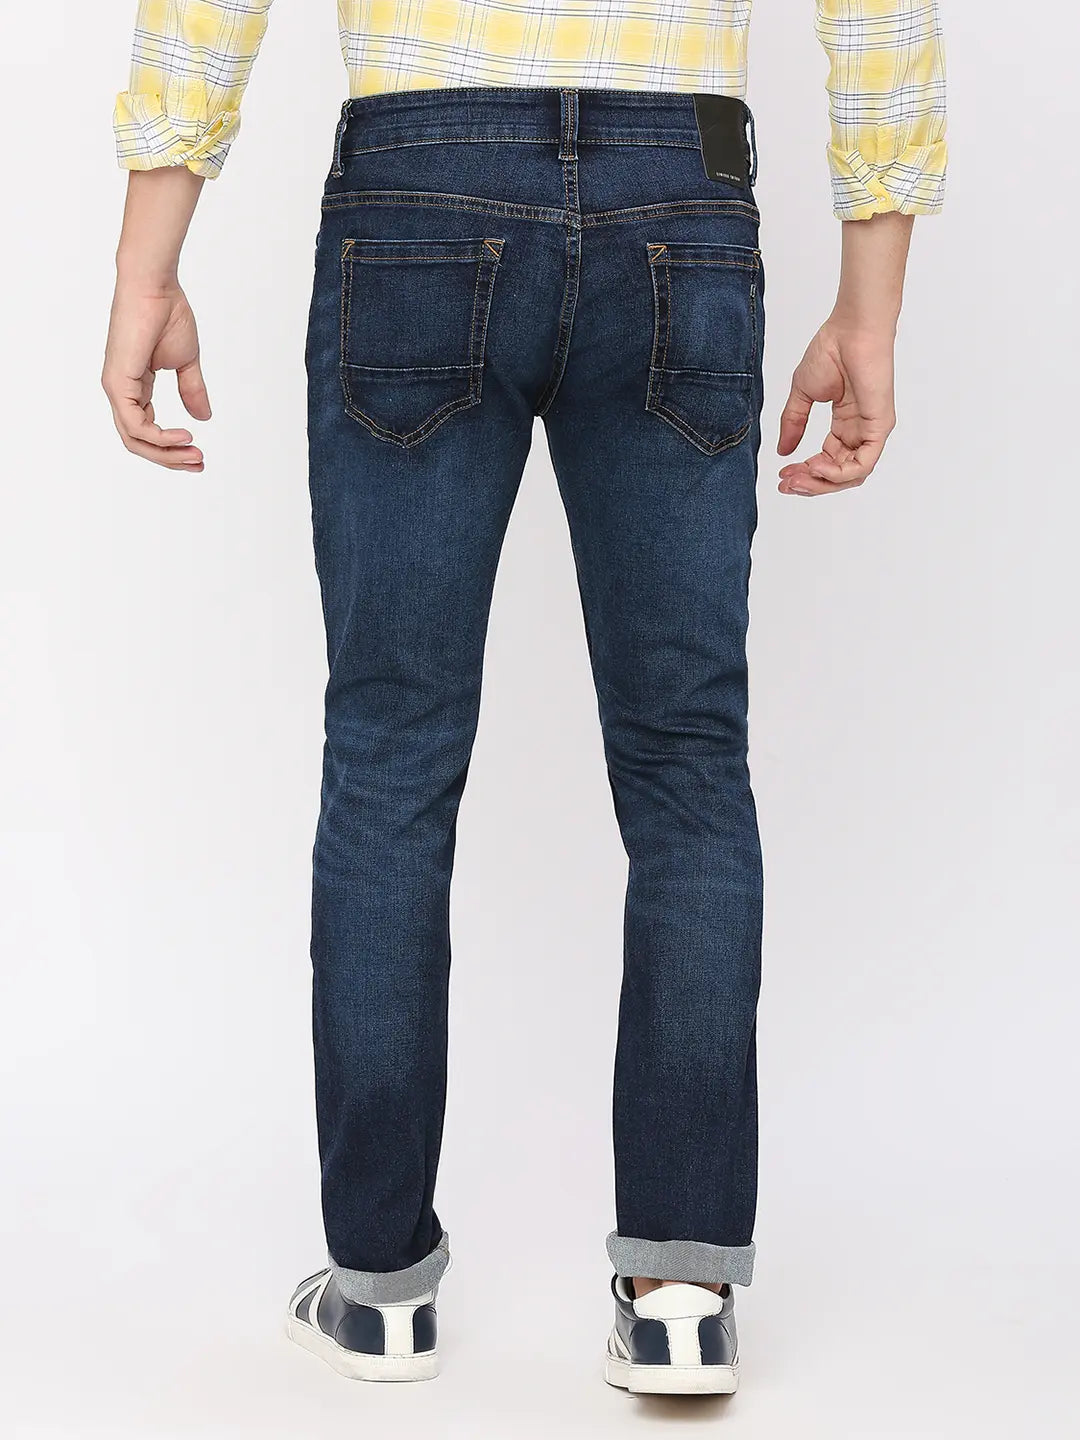 Spykar Men Mid Blue Cotton Regular Fit Narrow Length Clean Look Mid Rise Limited edition Jeans (Rover)